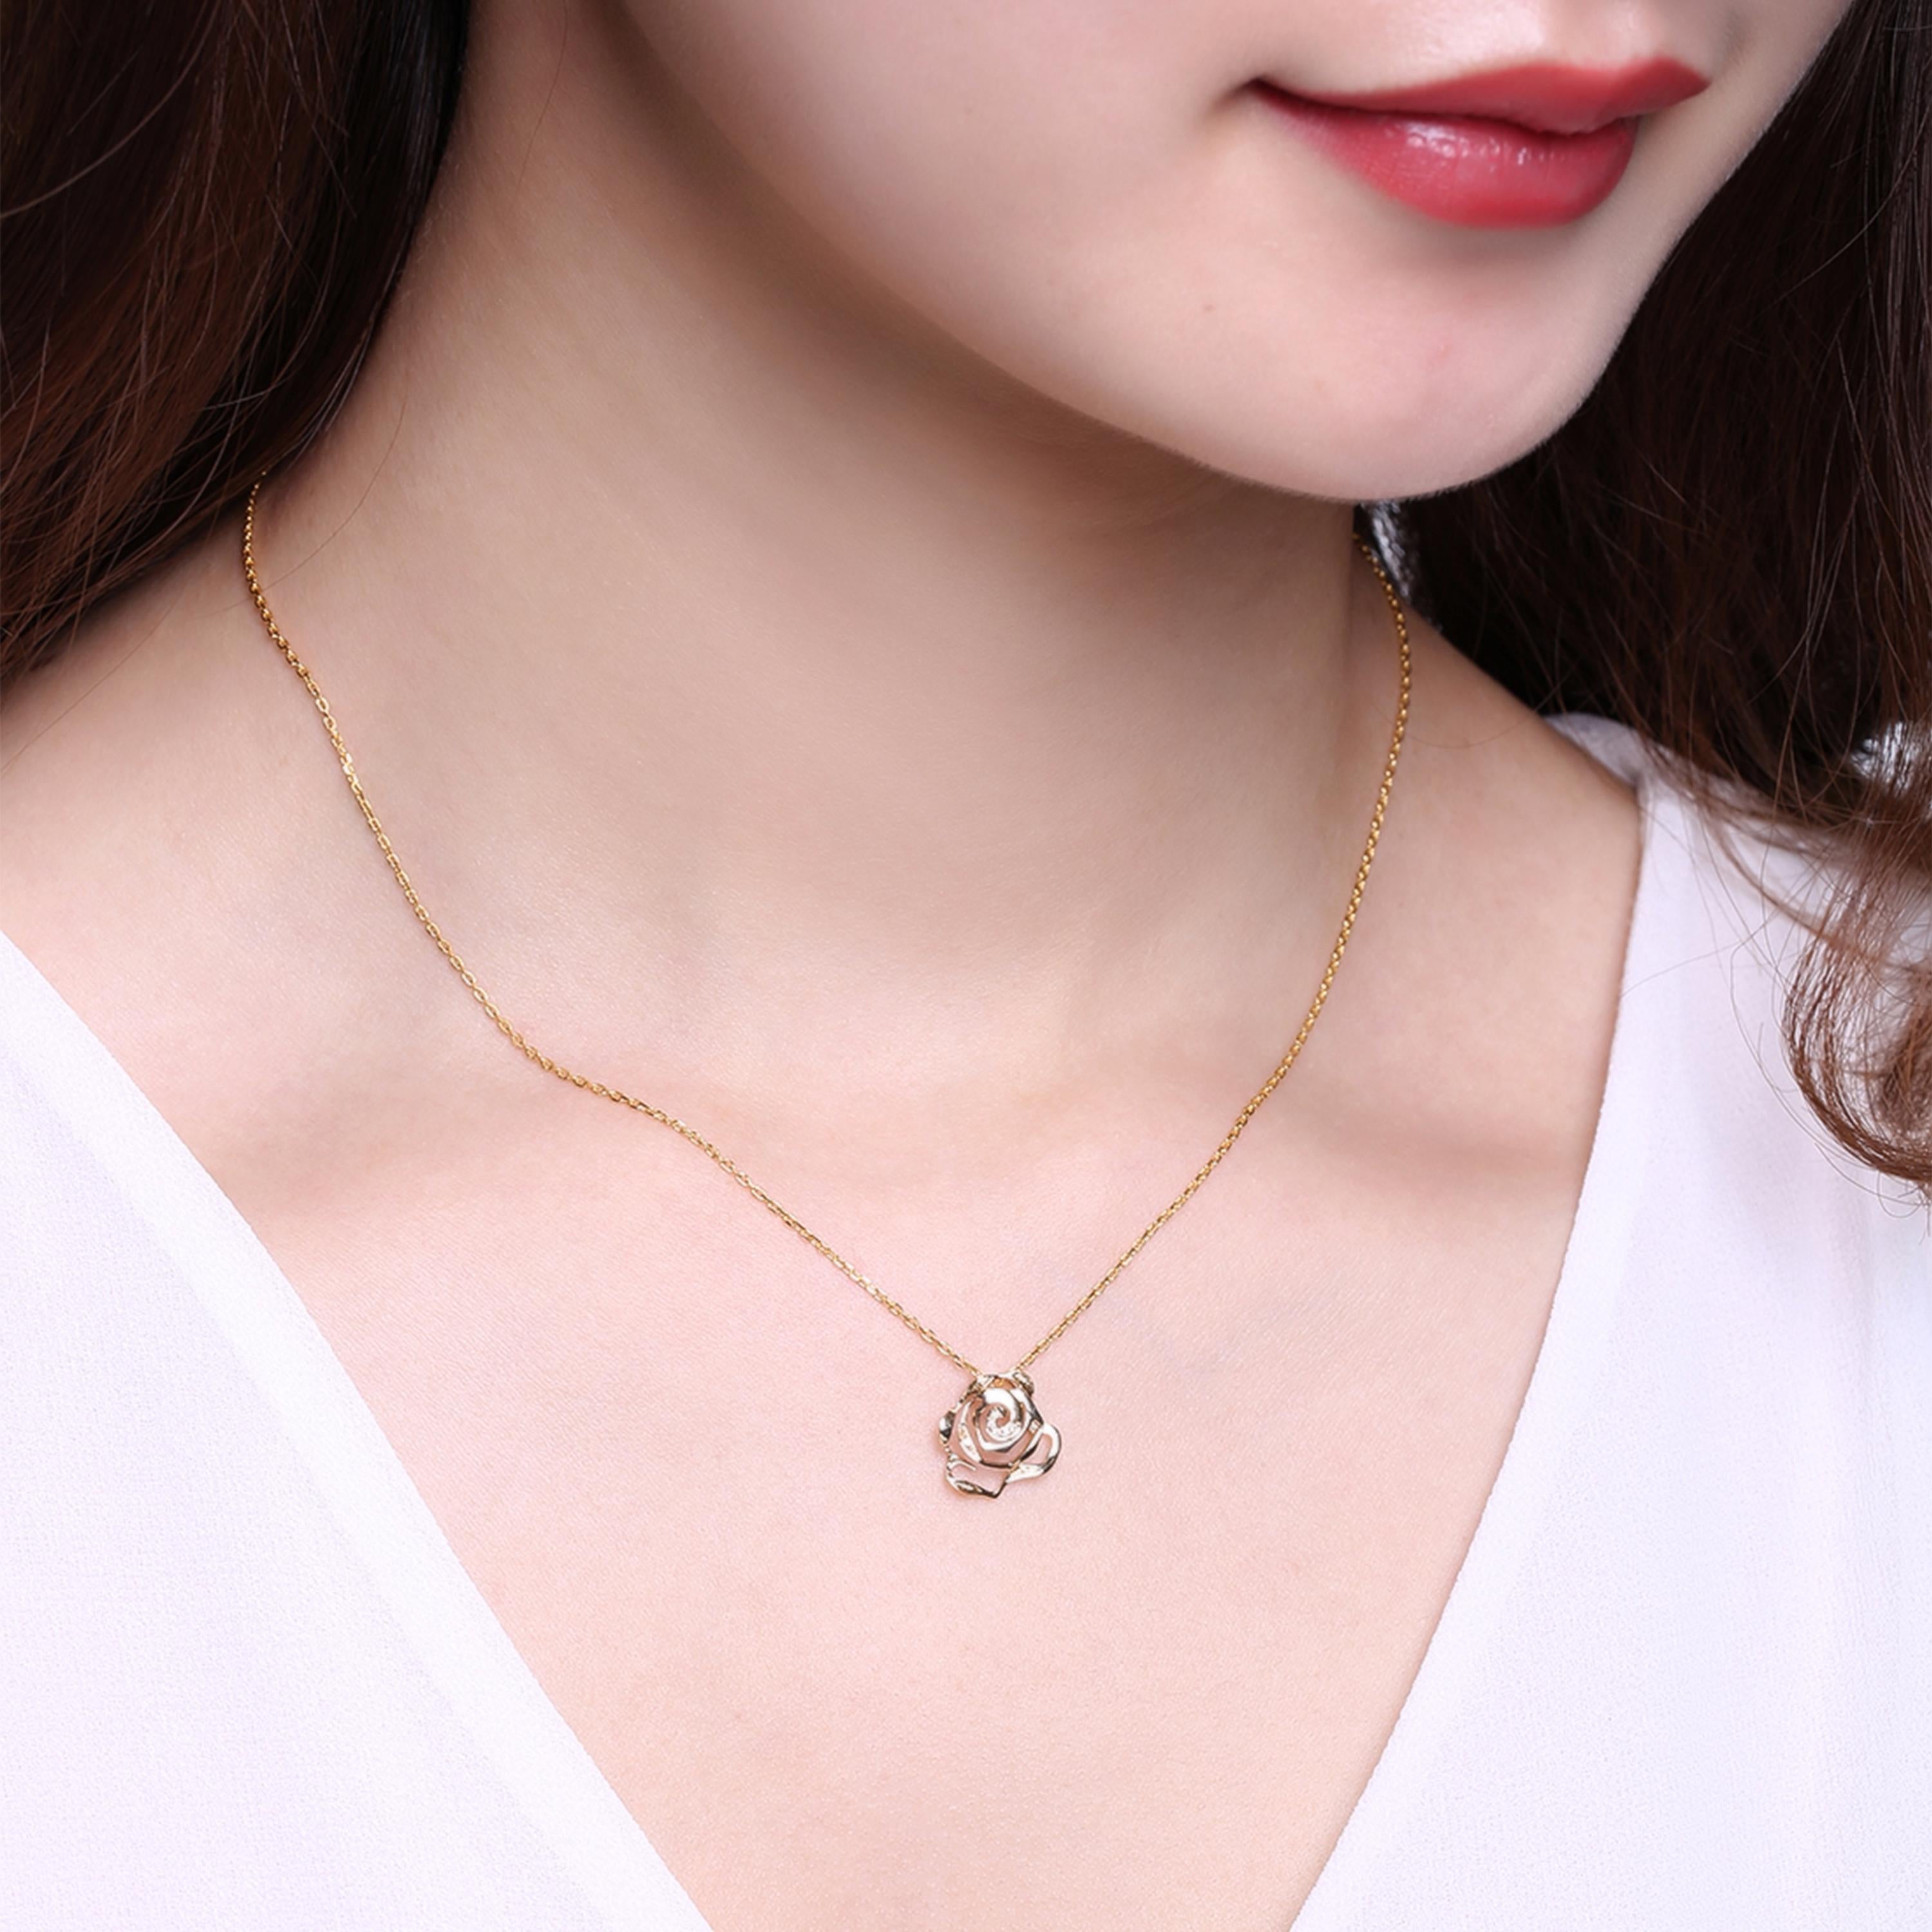 As enchanting as the real-life flower, the Rose collection offers a modern yet feminine look. This rose-inspired pendant features shimmering diamonds with a total weight of 0.012ct, set in 18ct white gold.

- Size (LxWxD): 12 x 12 x 4mm
- Weight: